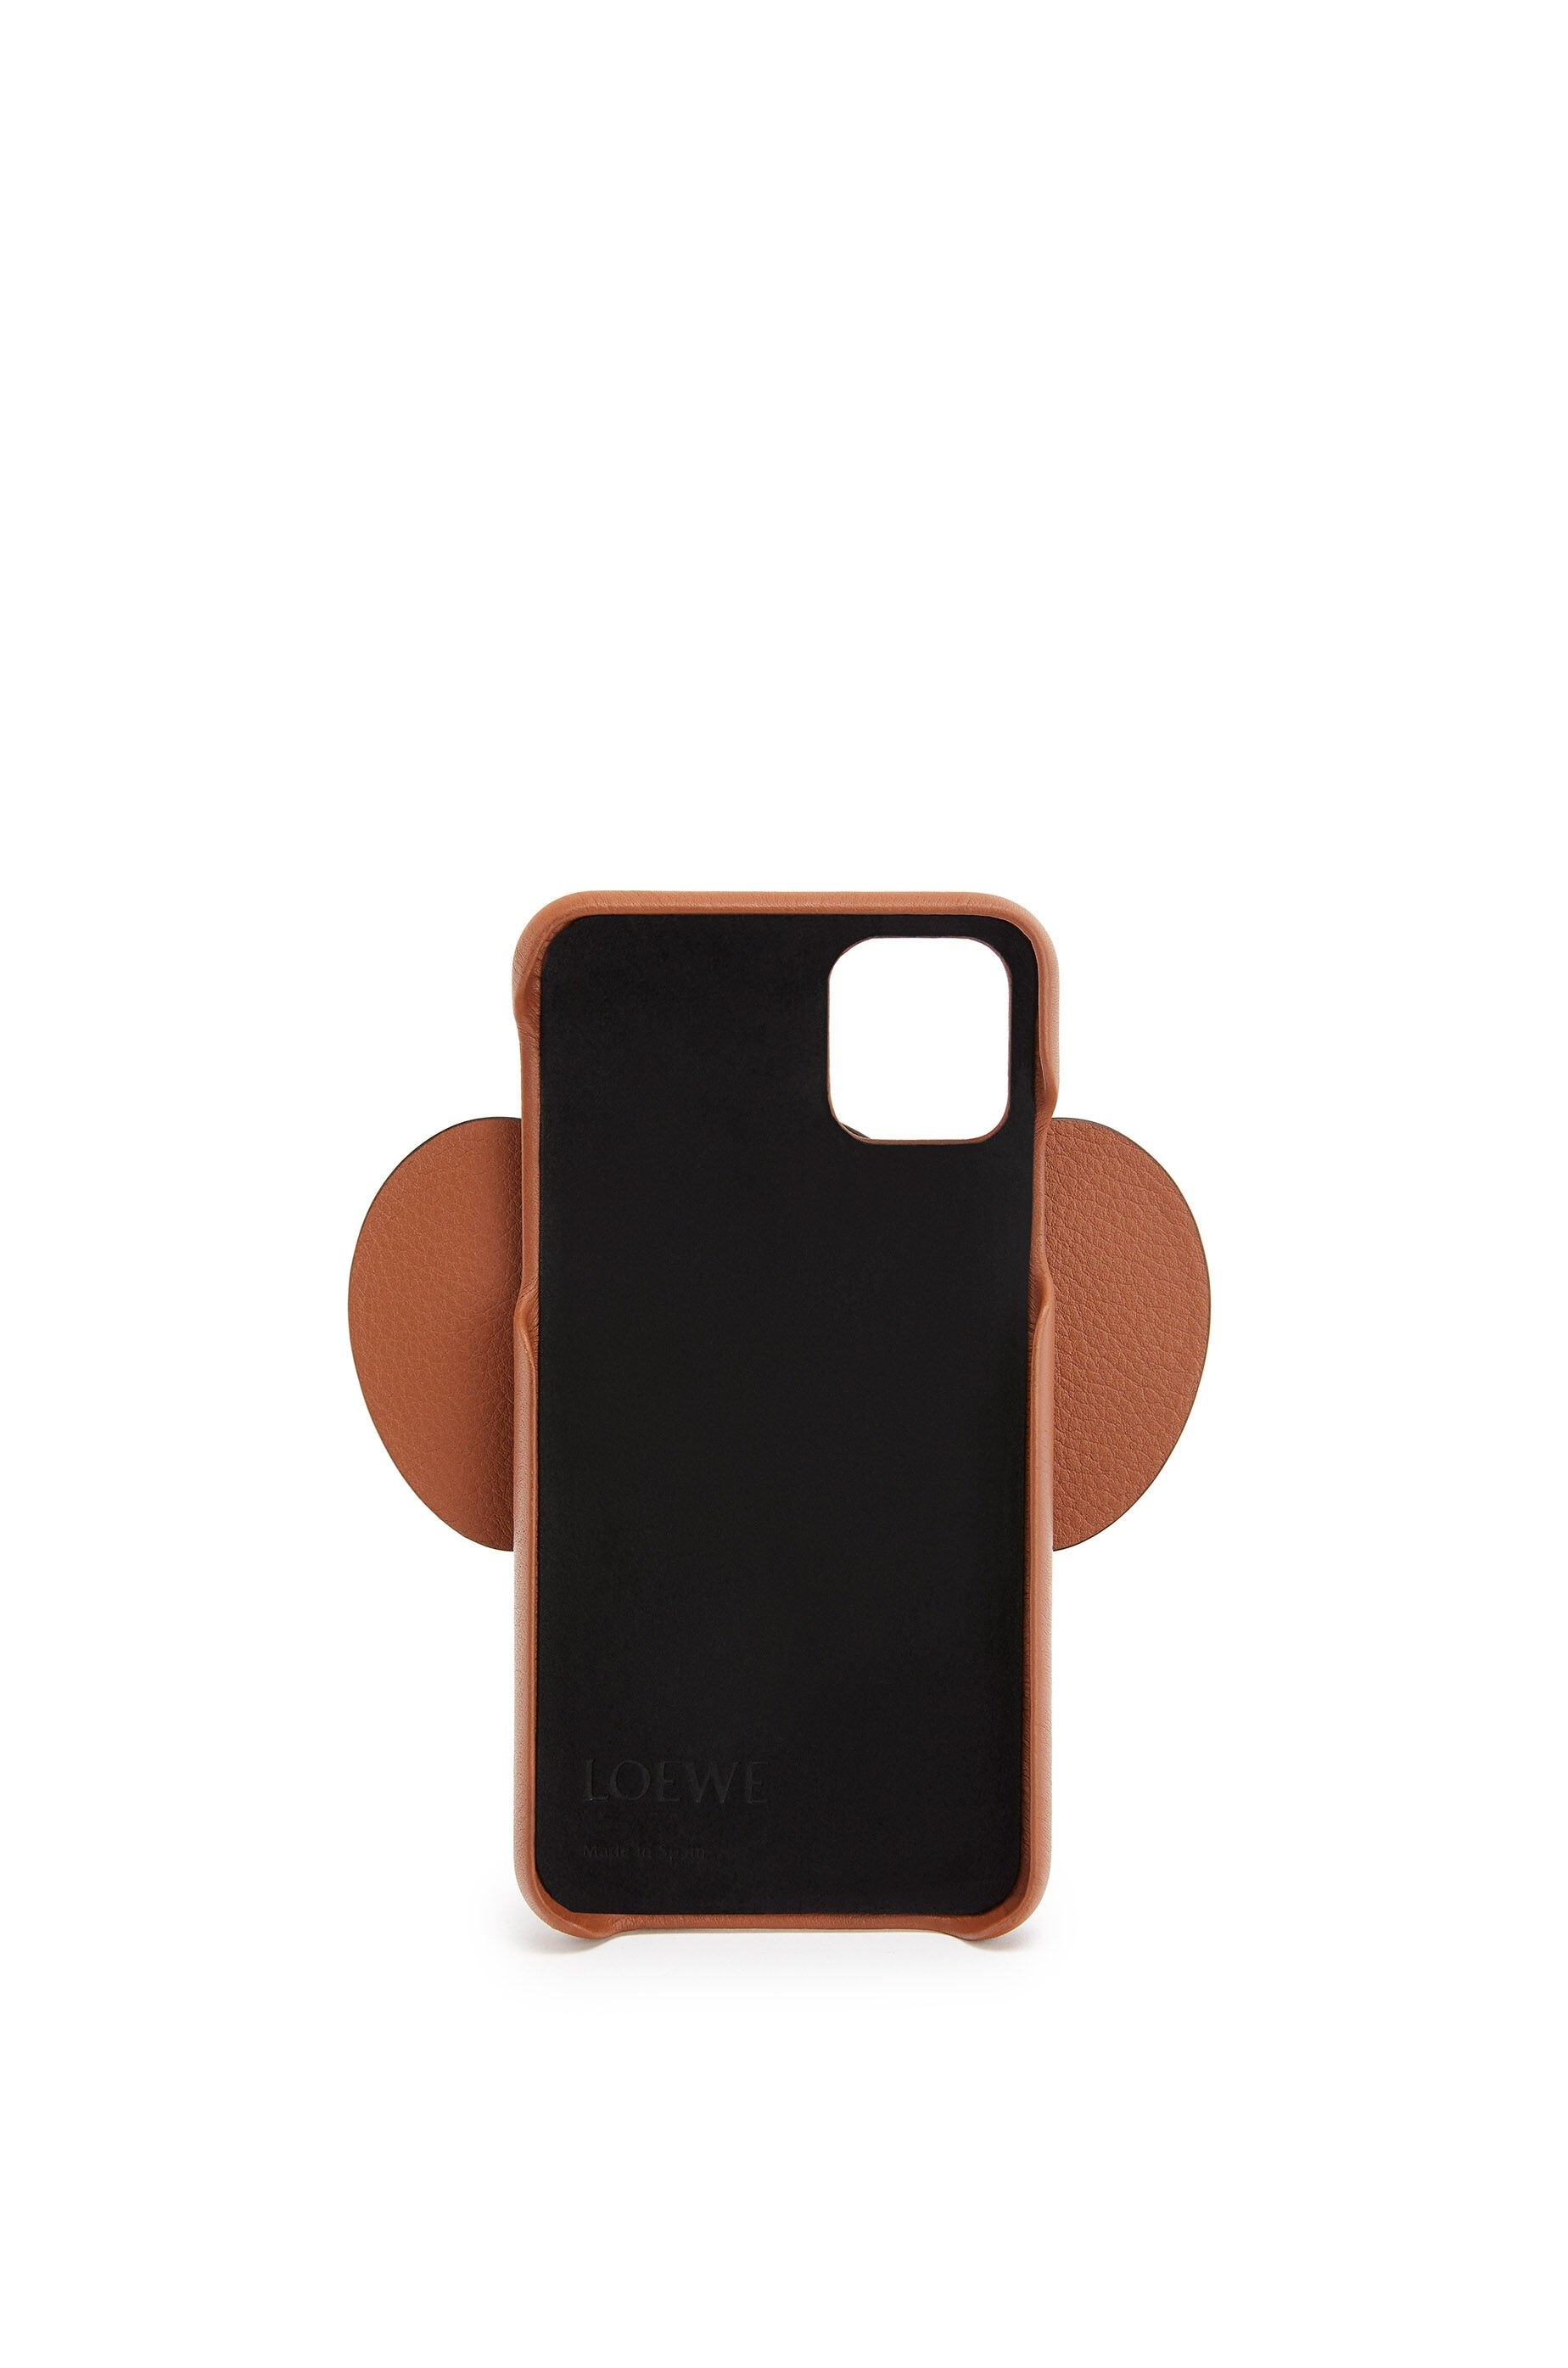 Elephant cover for iPhone 11 in classic calfskin - 3